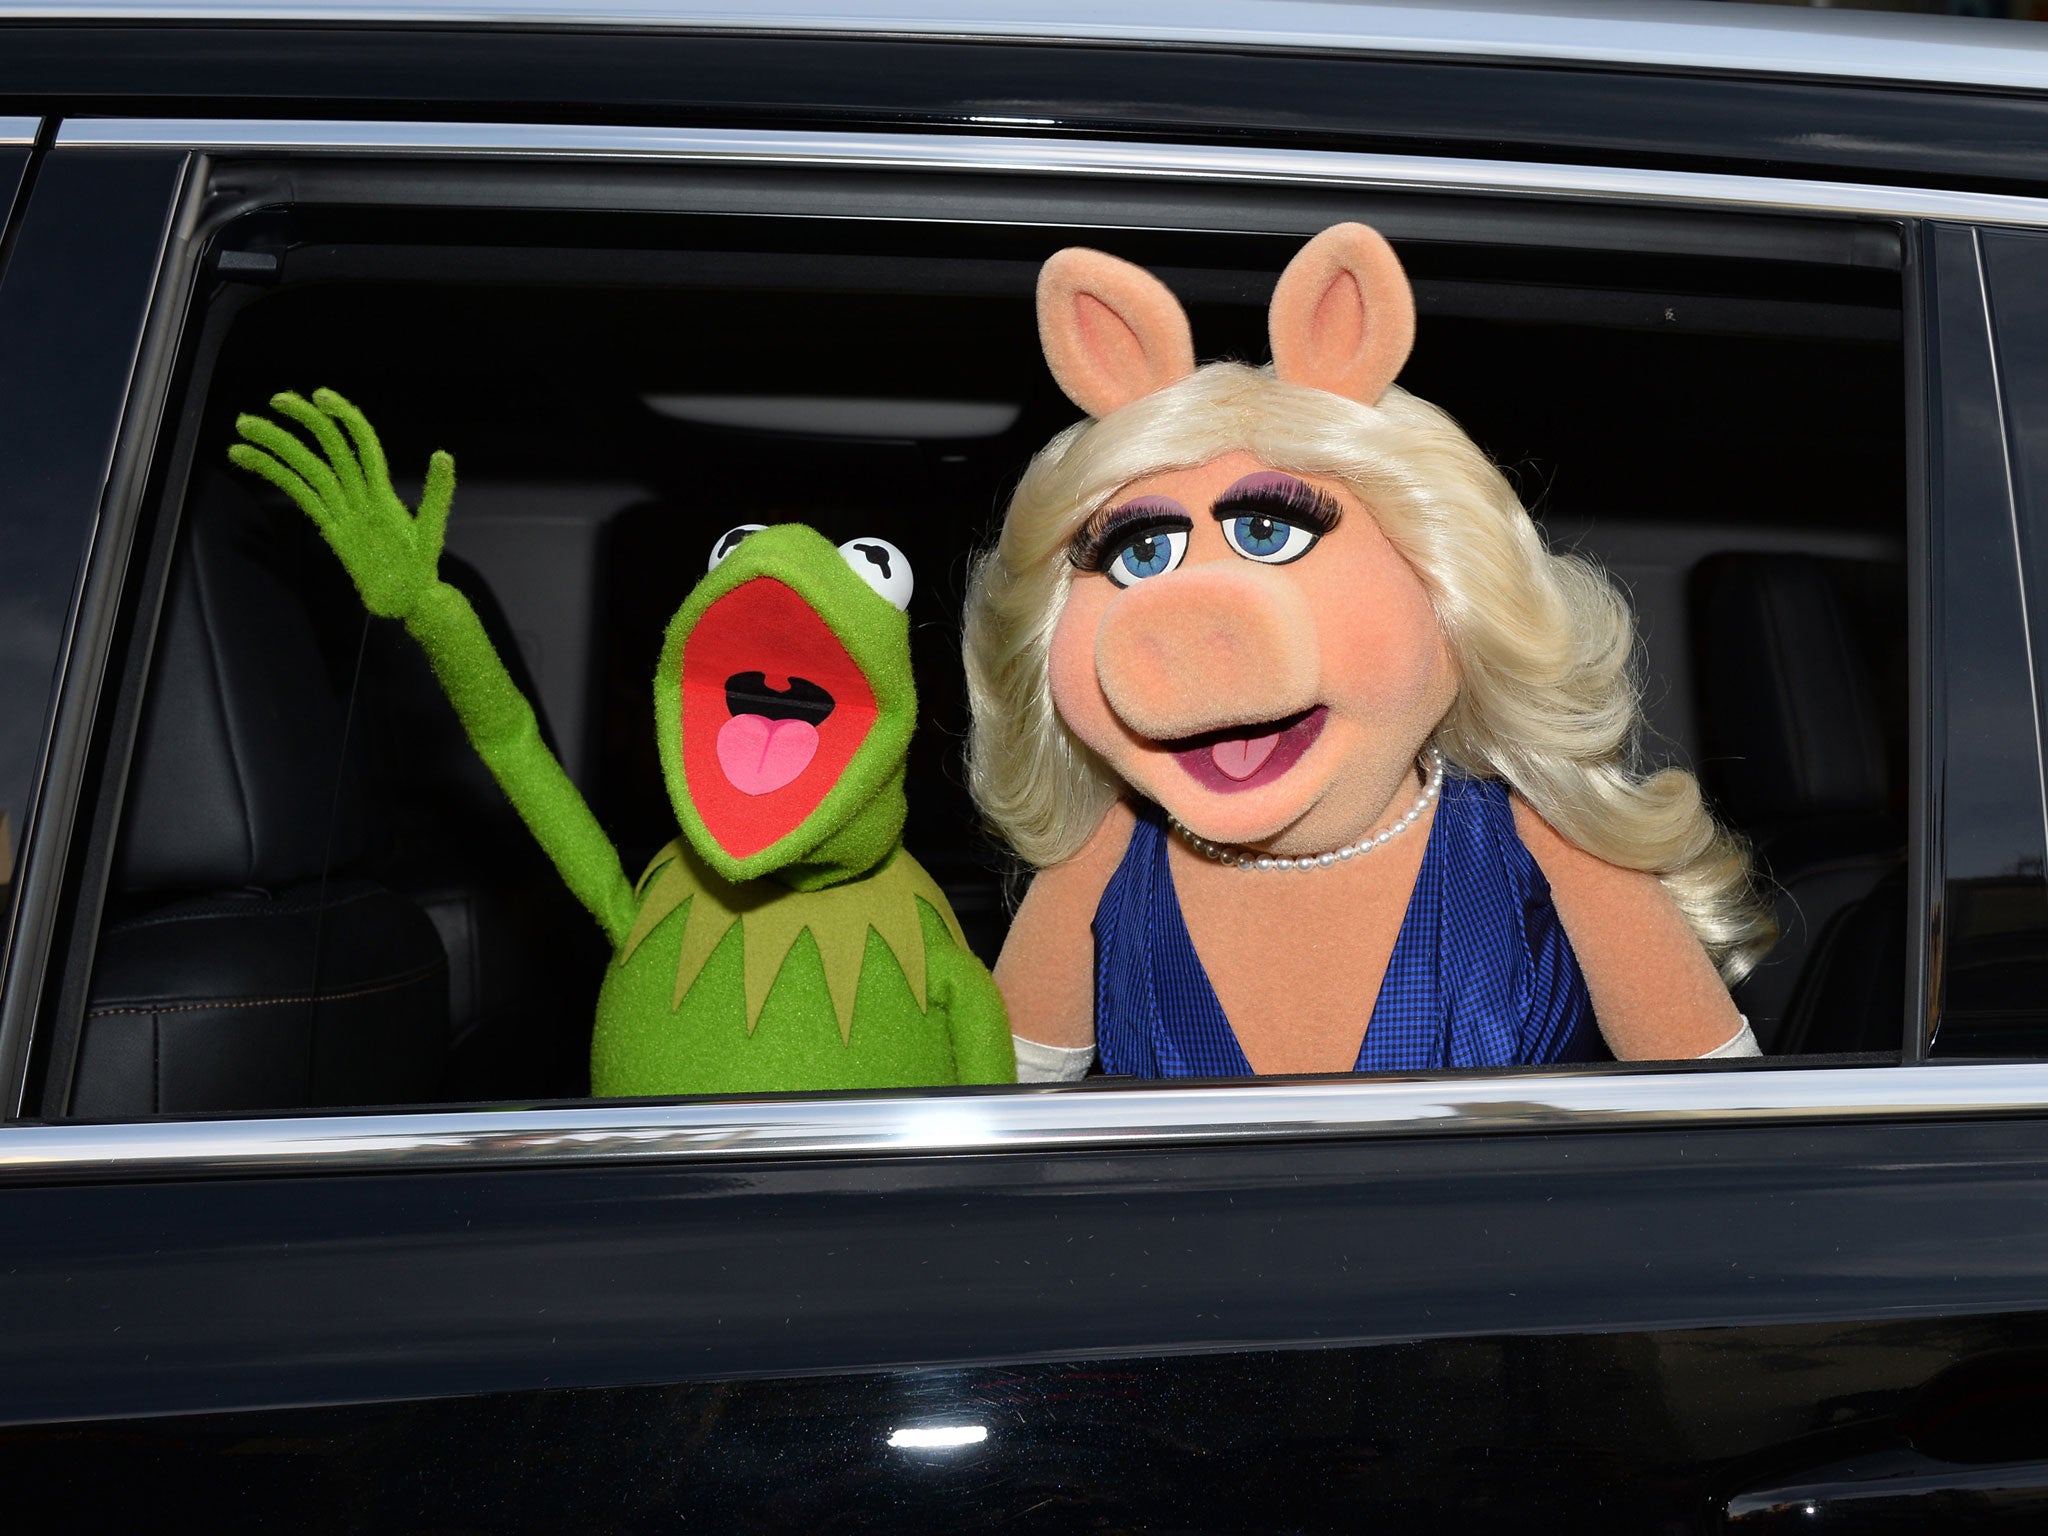 The Muppets are finally returning to television screens